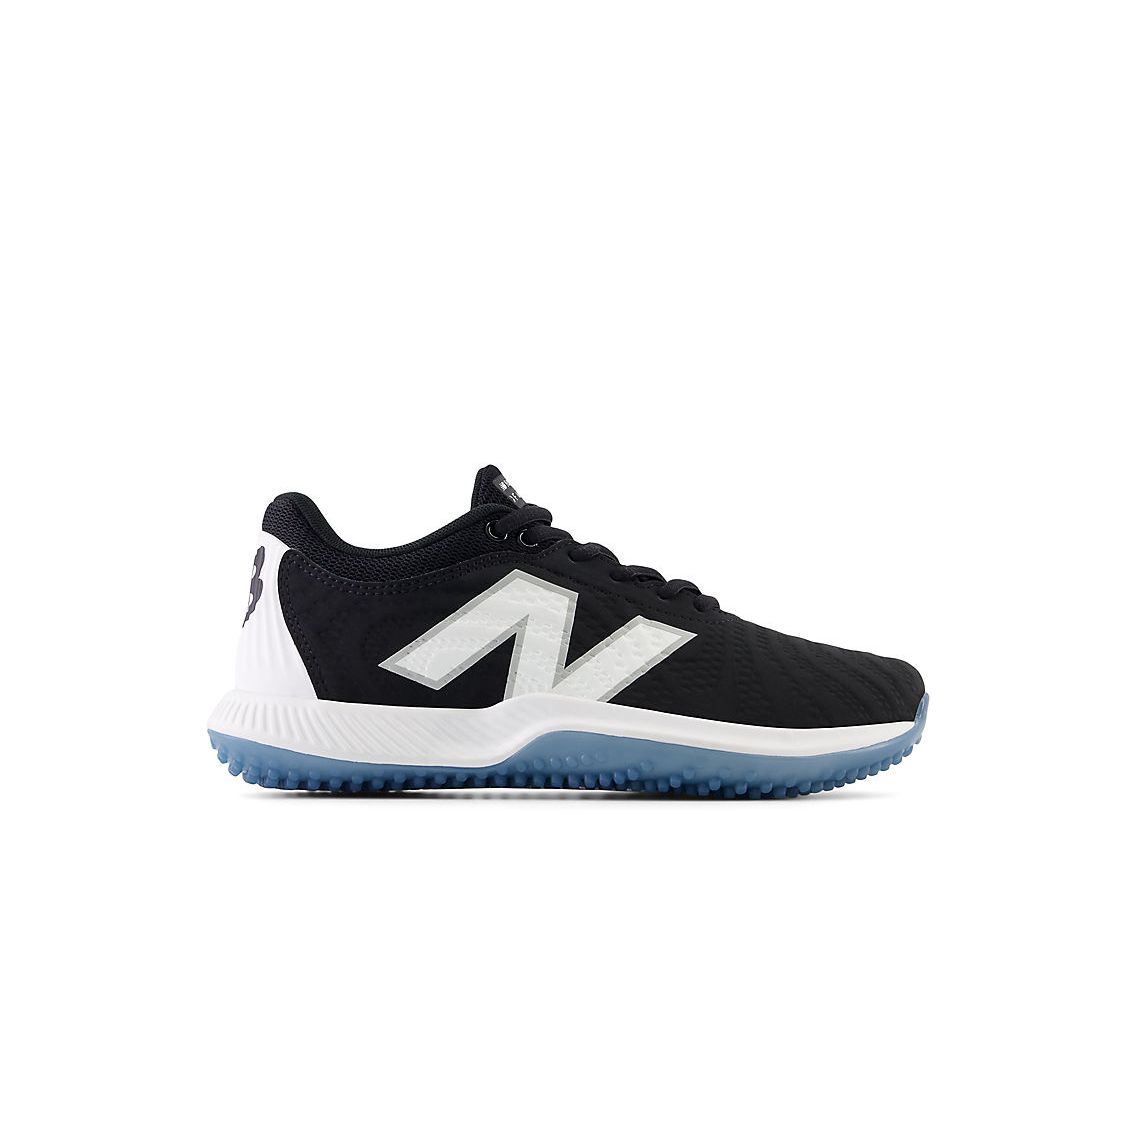 New Balance Women's FuelCell FUSE v4 Turf Trainer Softball Shoes - Black/Optic White - STFUSEK4